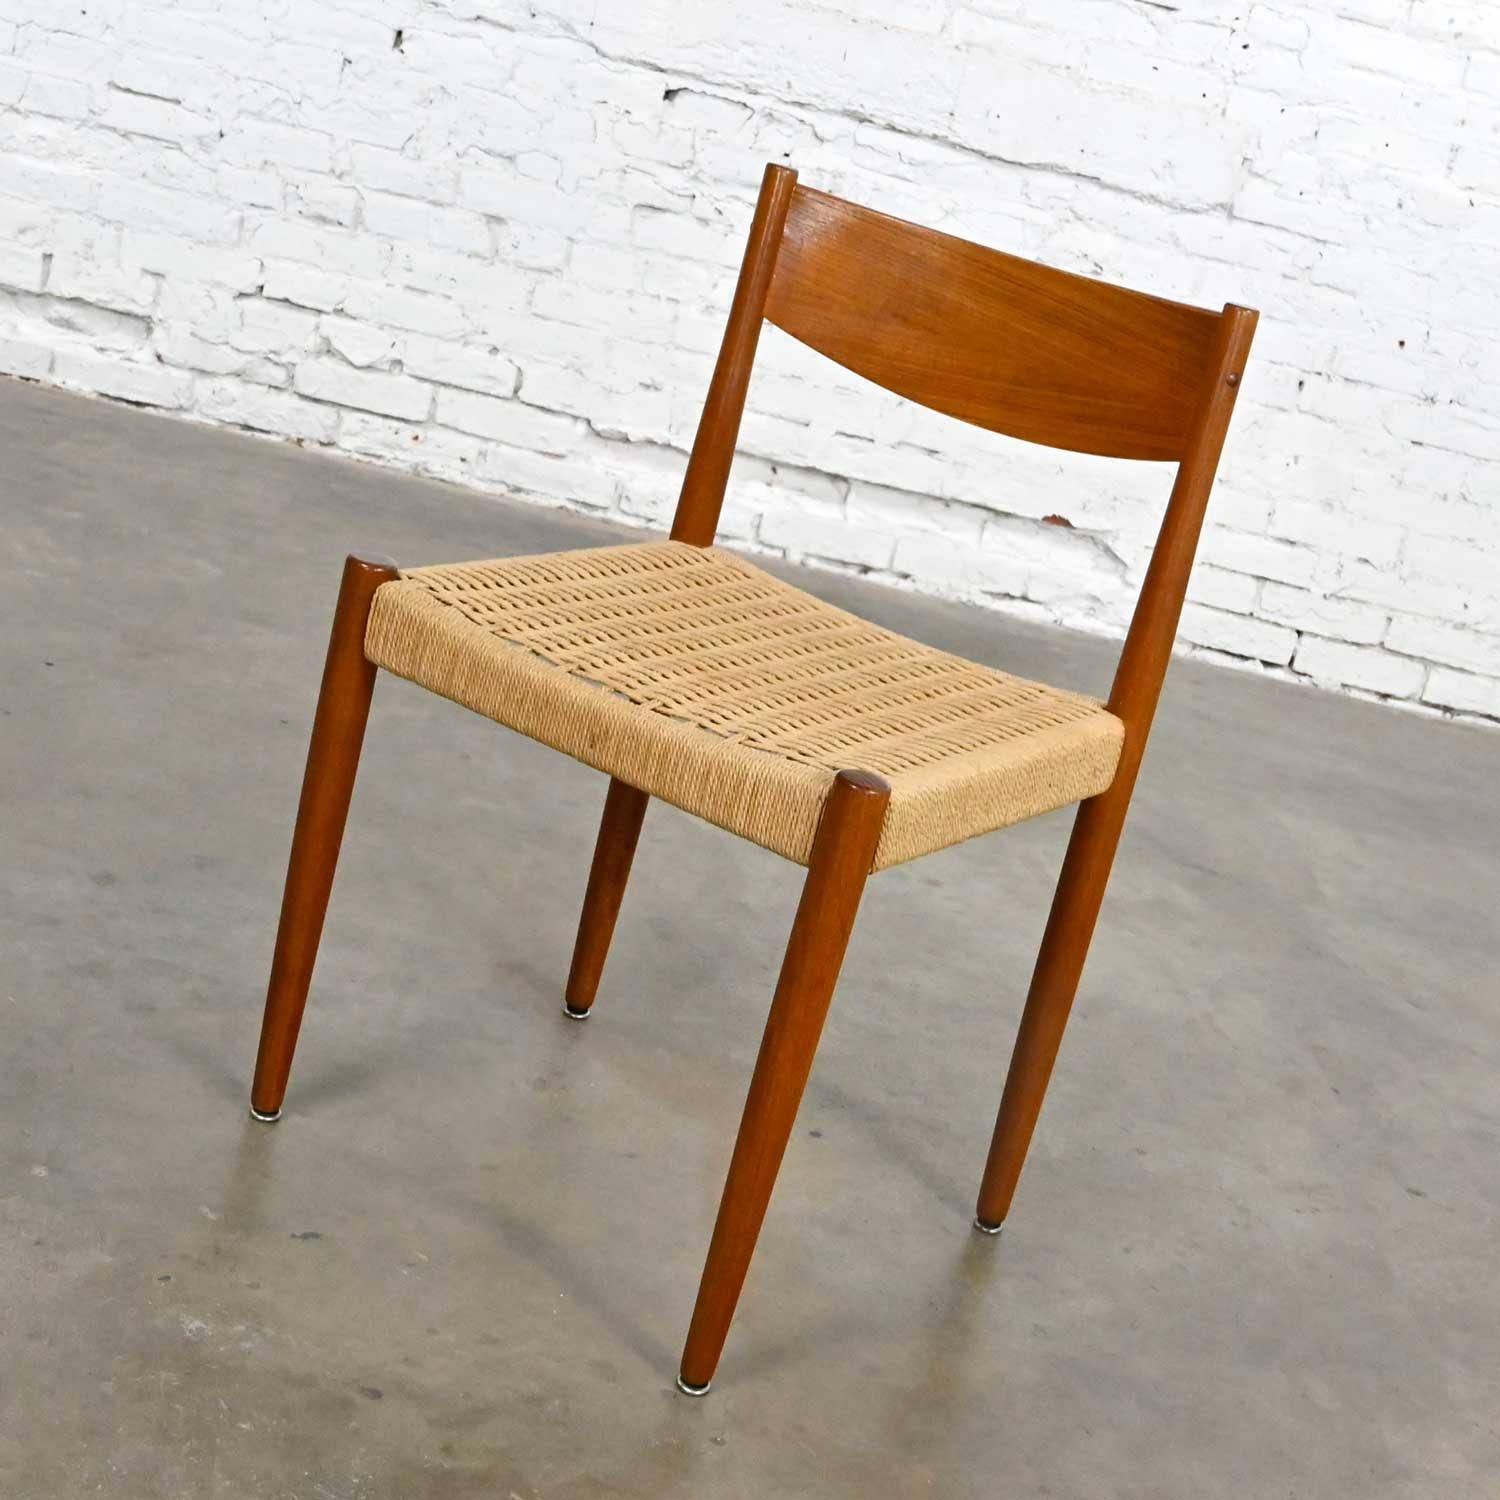 Lovely vintage Scandinavian Modern teak and paper cord woven seat side or dining chair attributed to designer Poul Volther for Frem Rojle. Beautiful condition, keeping in mind that this is vintage and not new so will have signs of use and wear.